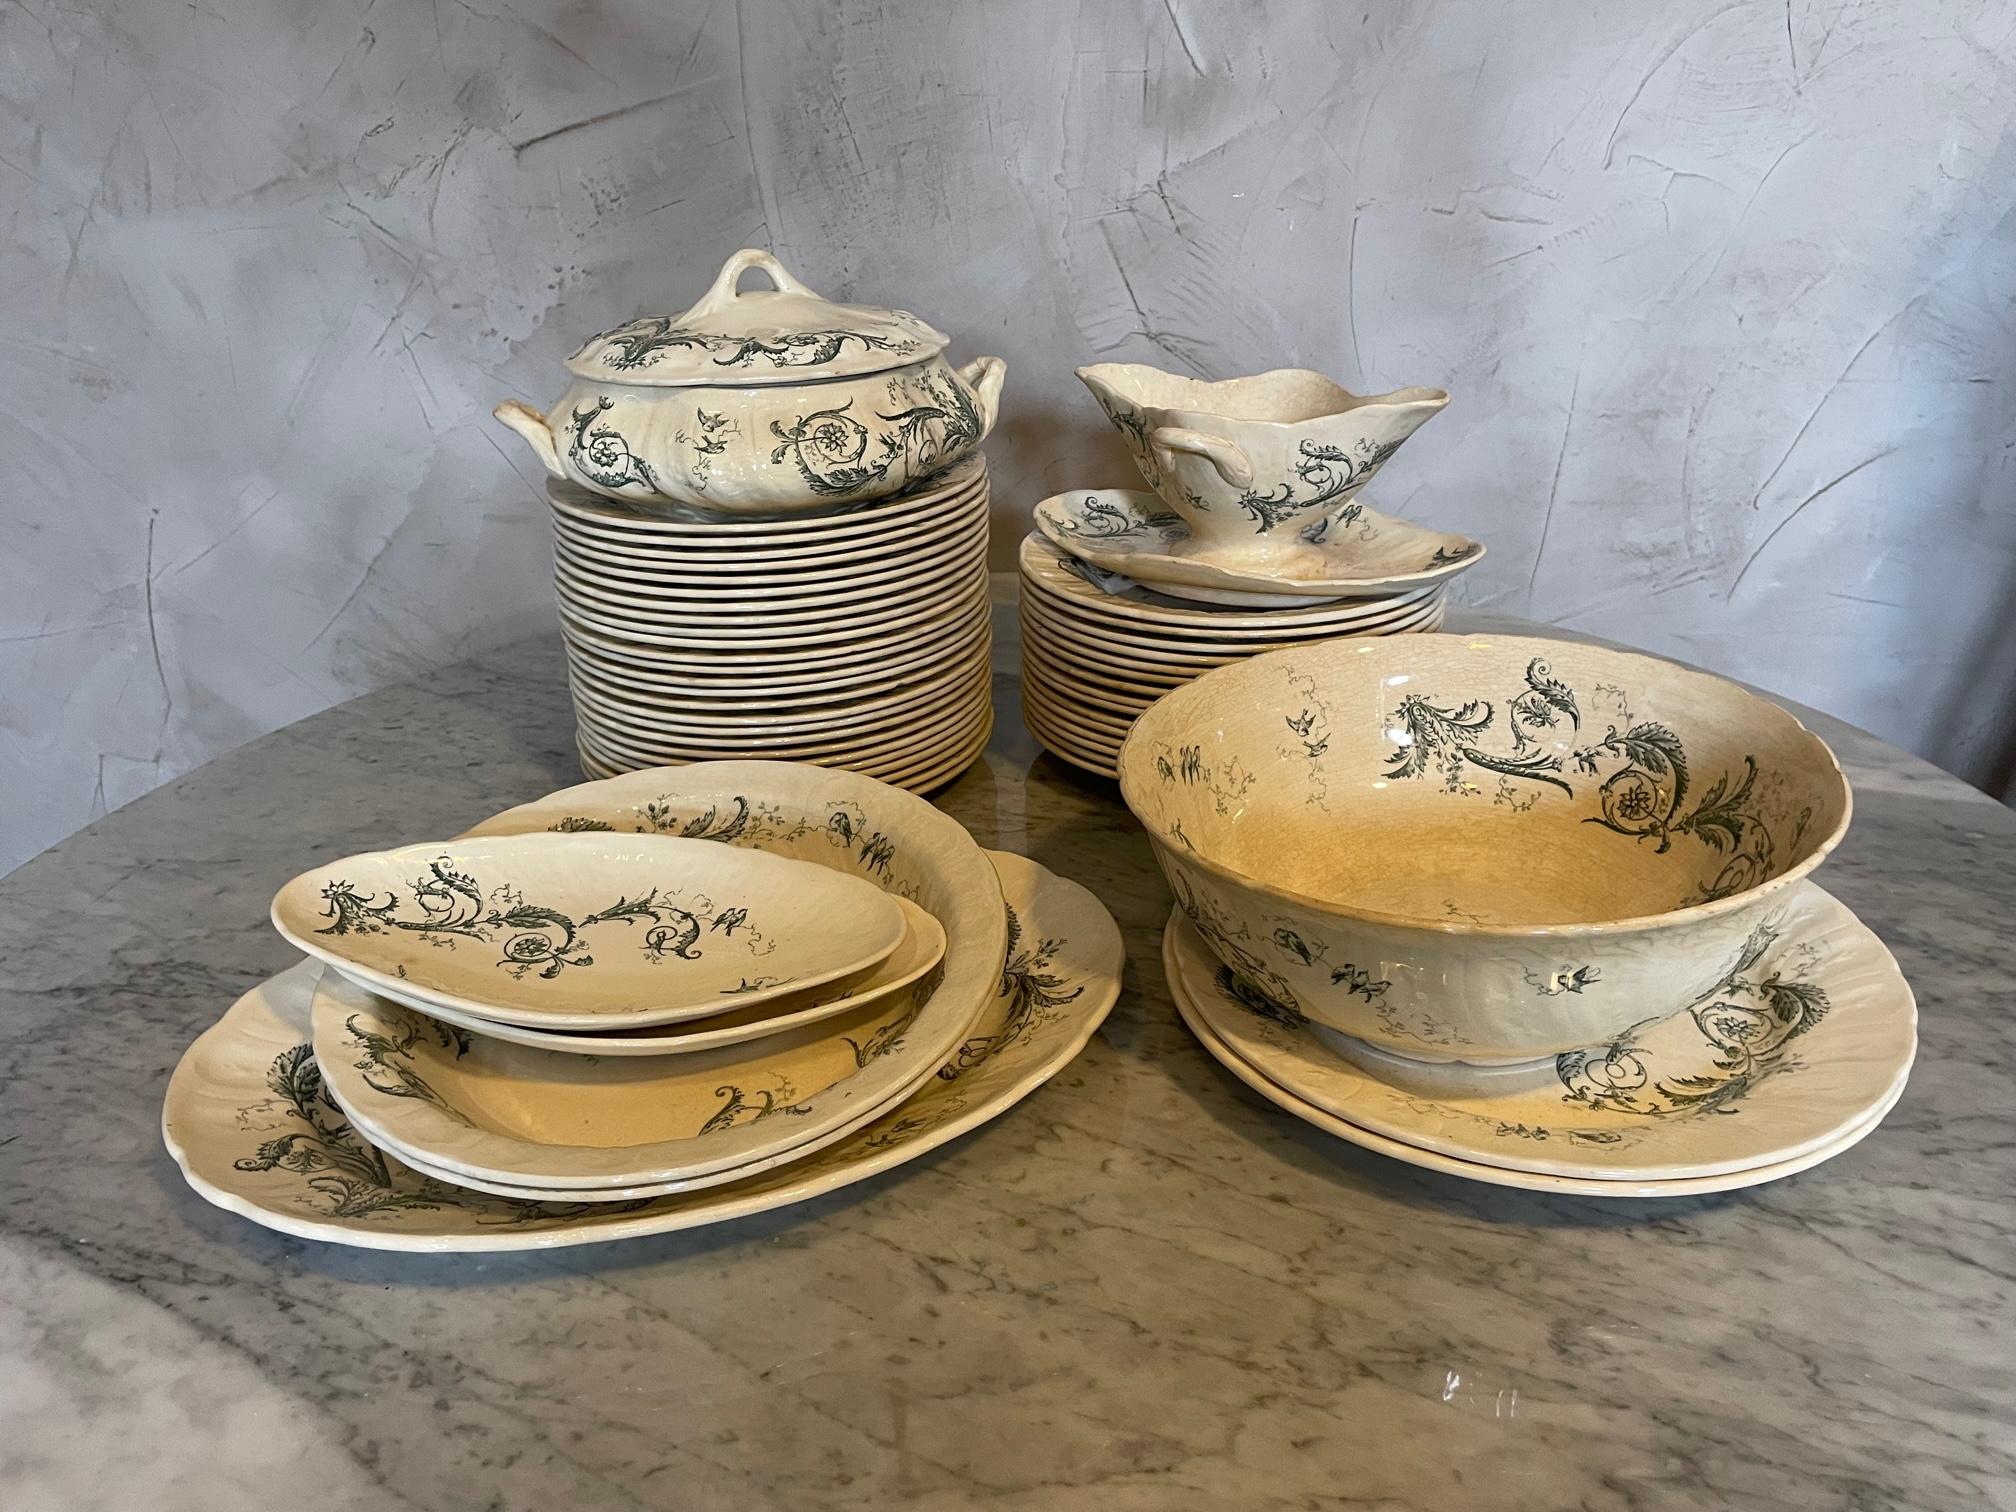 Very beautiful service in Gien porcelain dating from the beginning of the 20th century composed of 50 pieces:
- 2 ramekins
- 1 tureen
- 1 long dish
- 2 large round dishes
- 2 large hollow dishes
- 1 salad bowl
- 1 sauce boat
- 25 flat plates